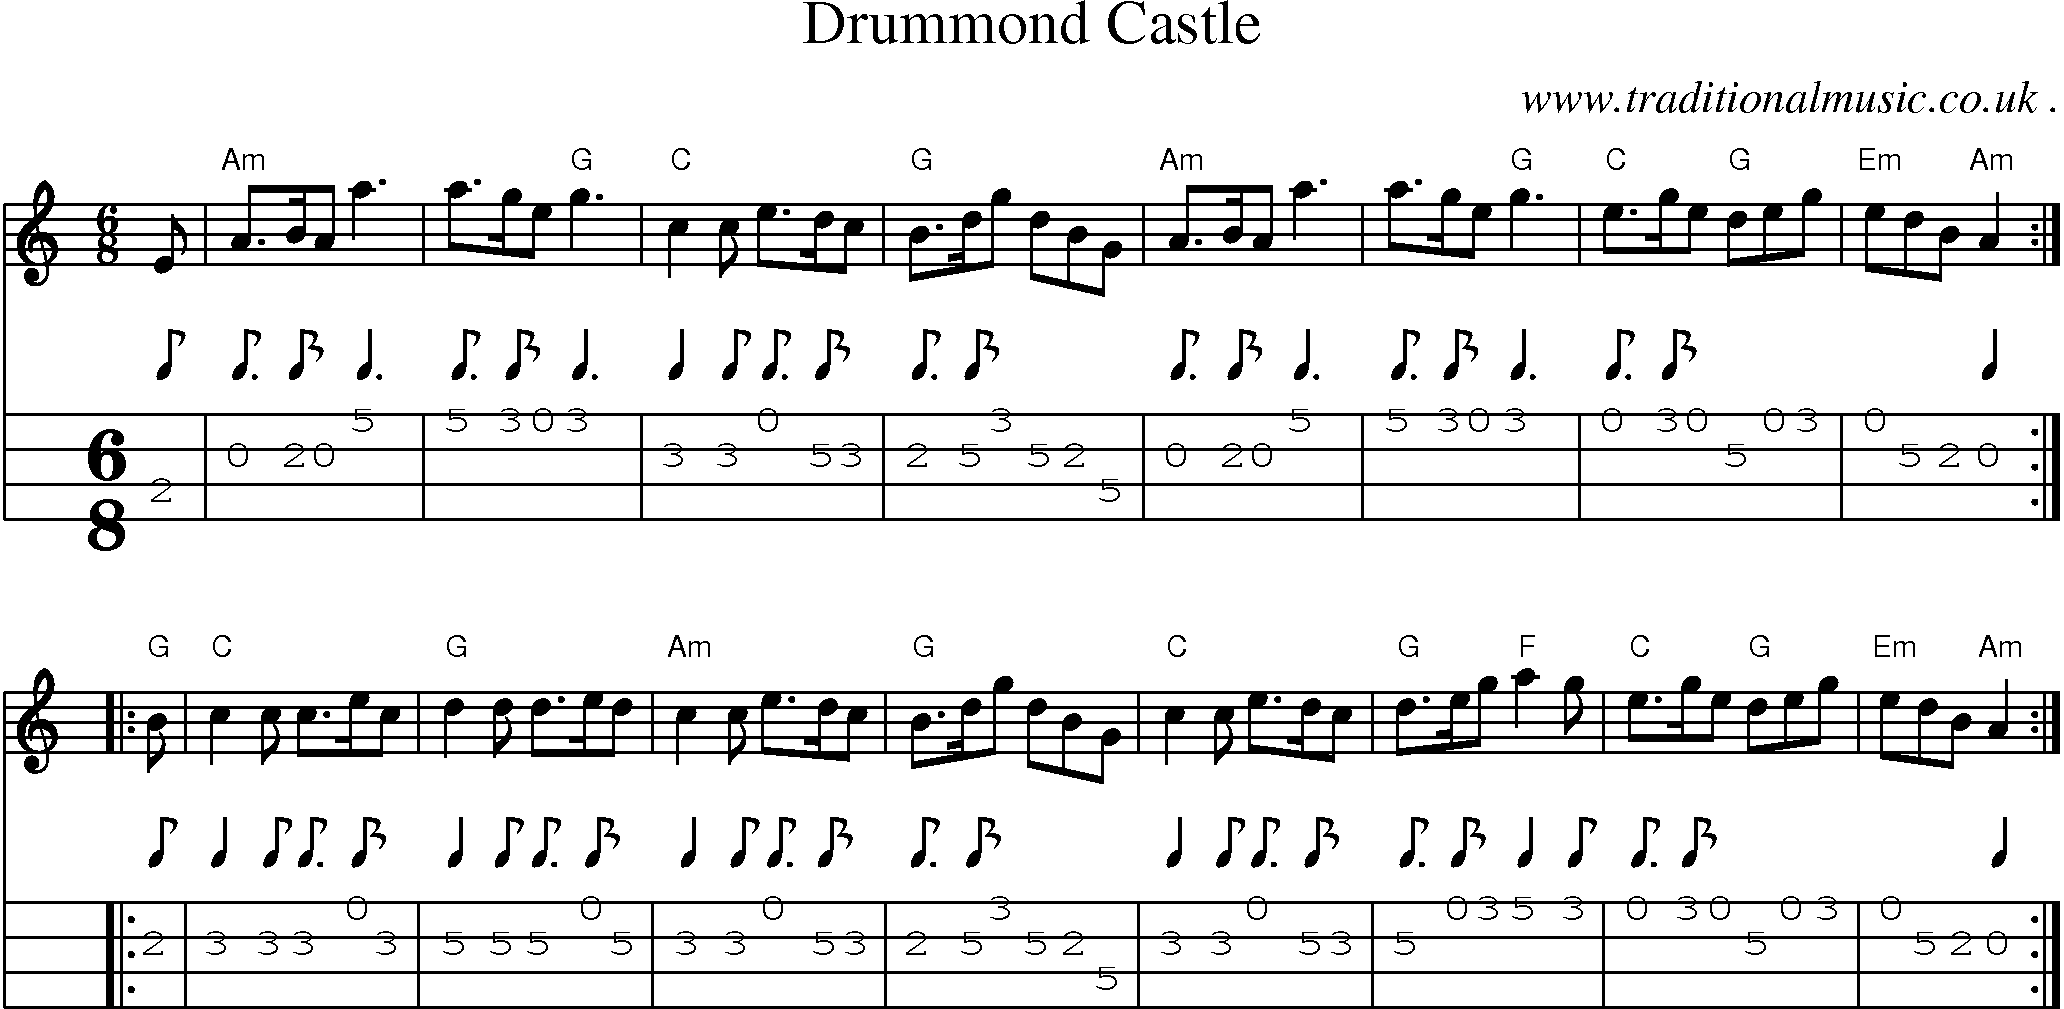 Sheet-music  score, Chords and Mandolin Tabs for Drummond Castle